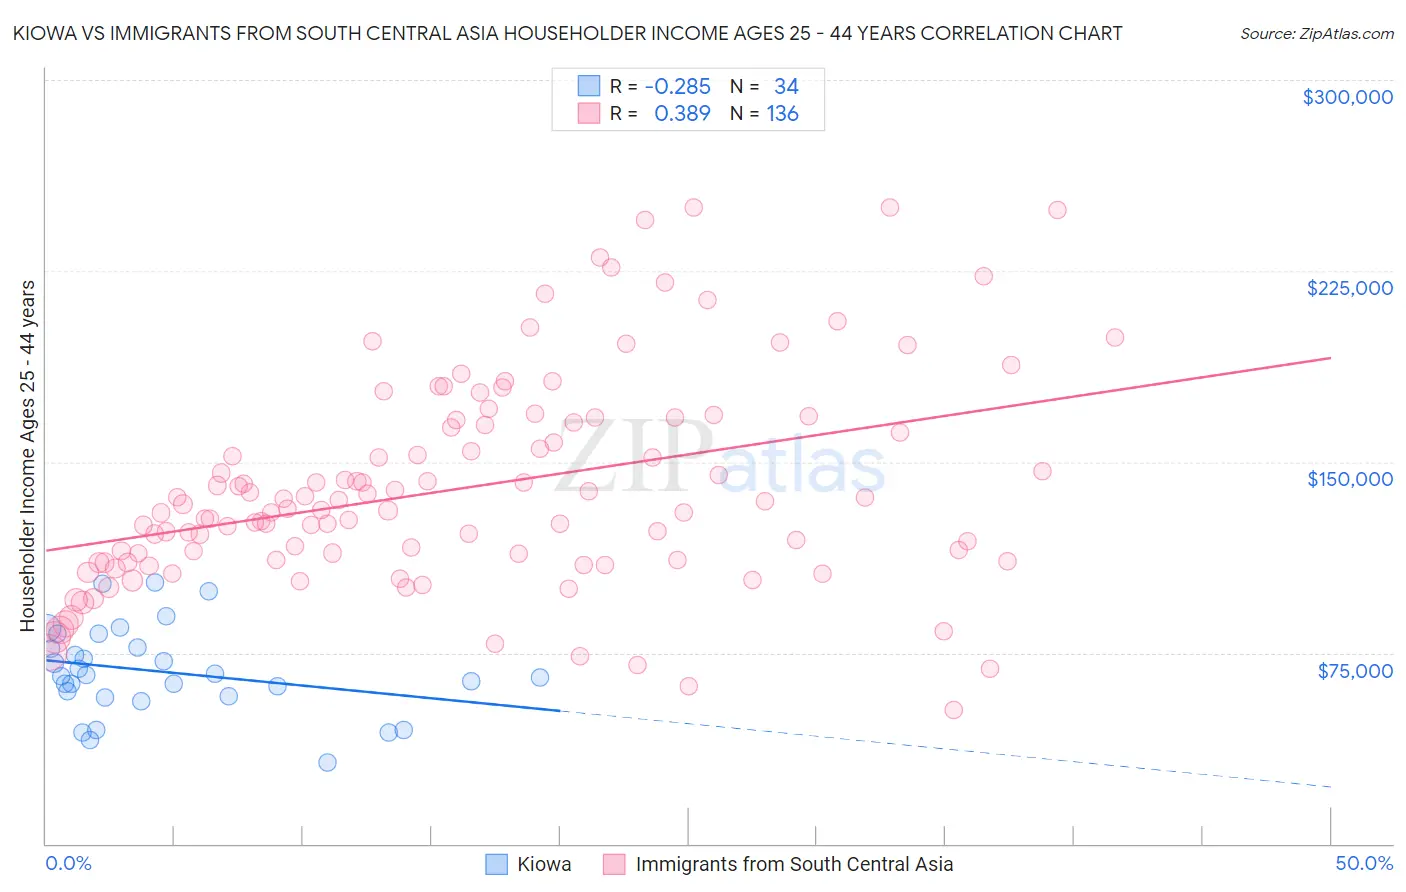 Kiowa vs Immigrants from South Central Asia Householder Income Ages 25 - 44 years